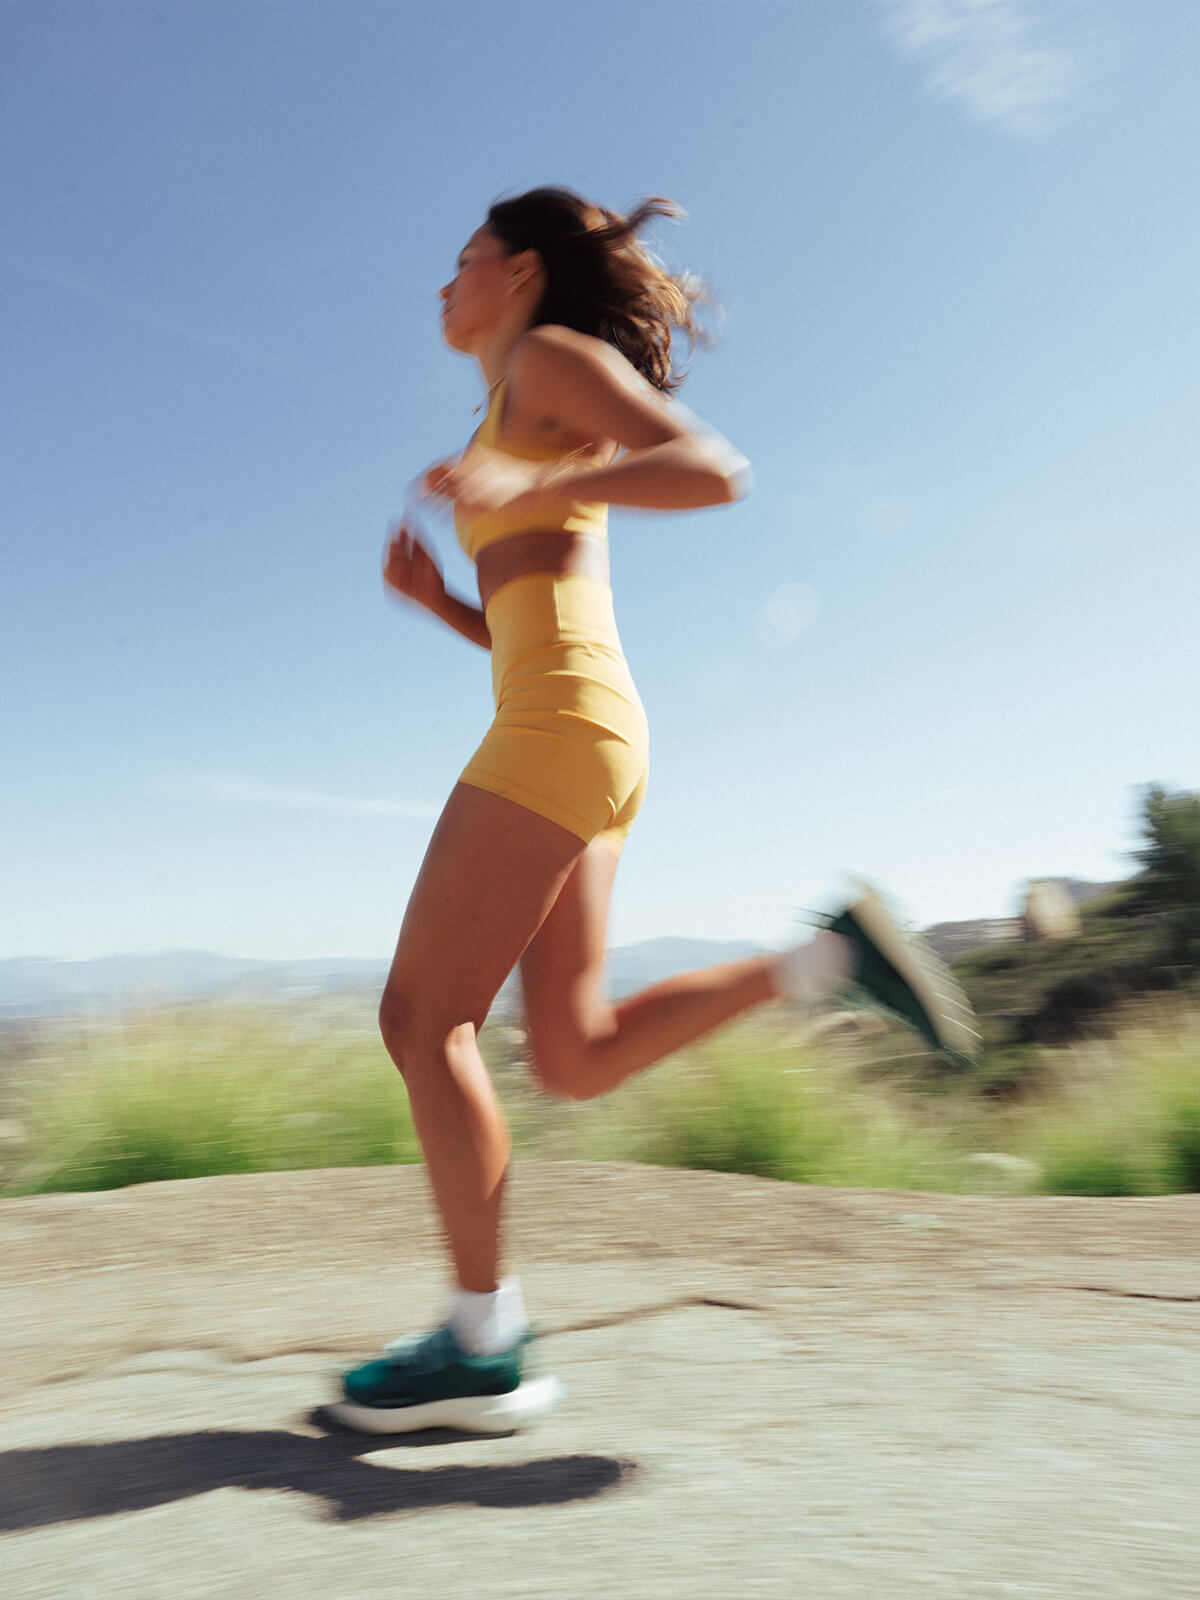 Blurred image of woman running in green Hilma running shoes